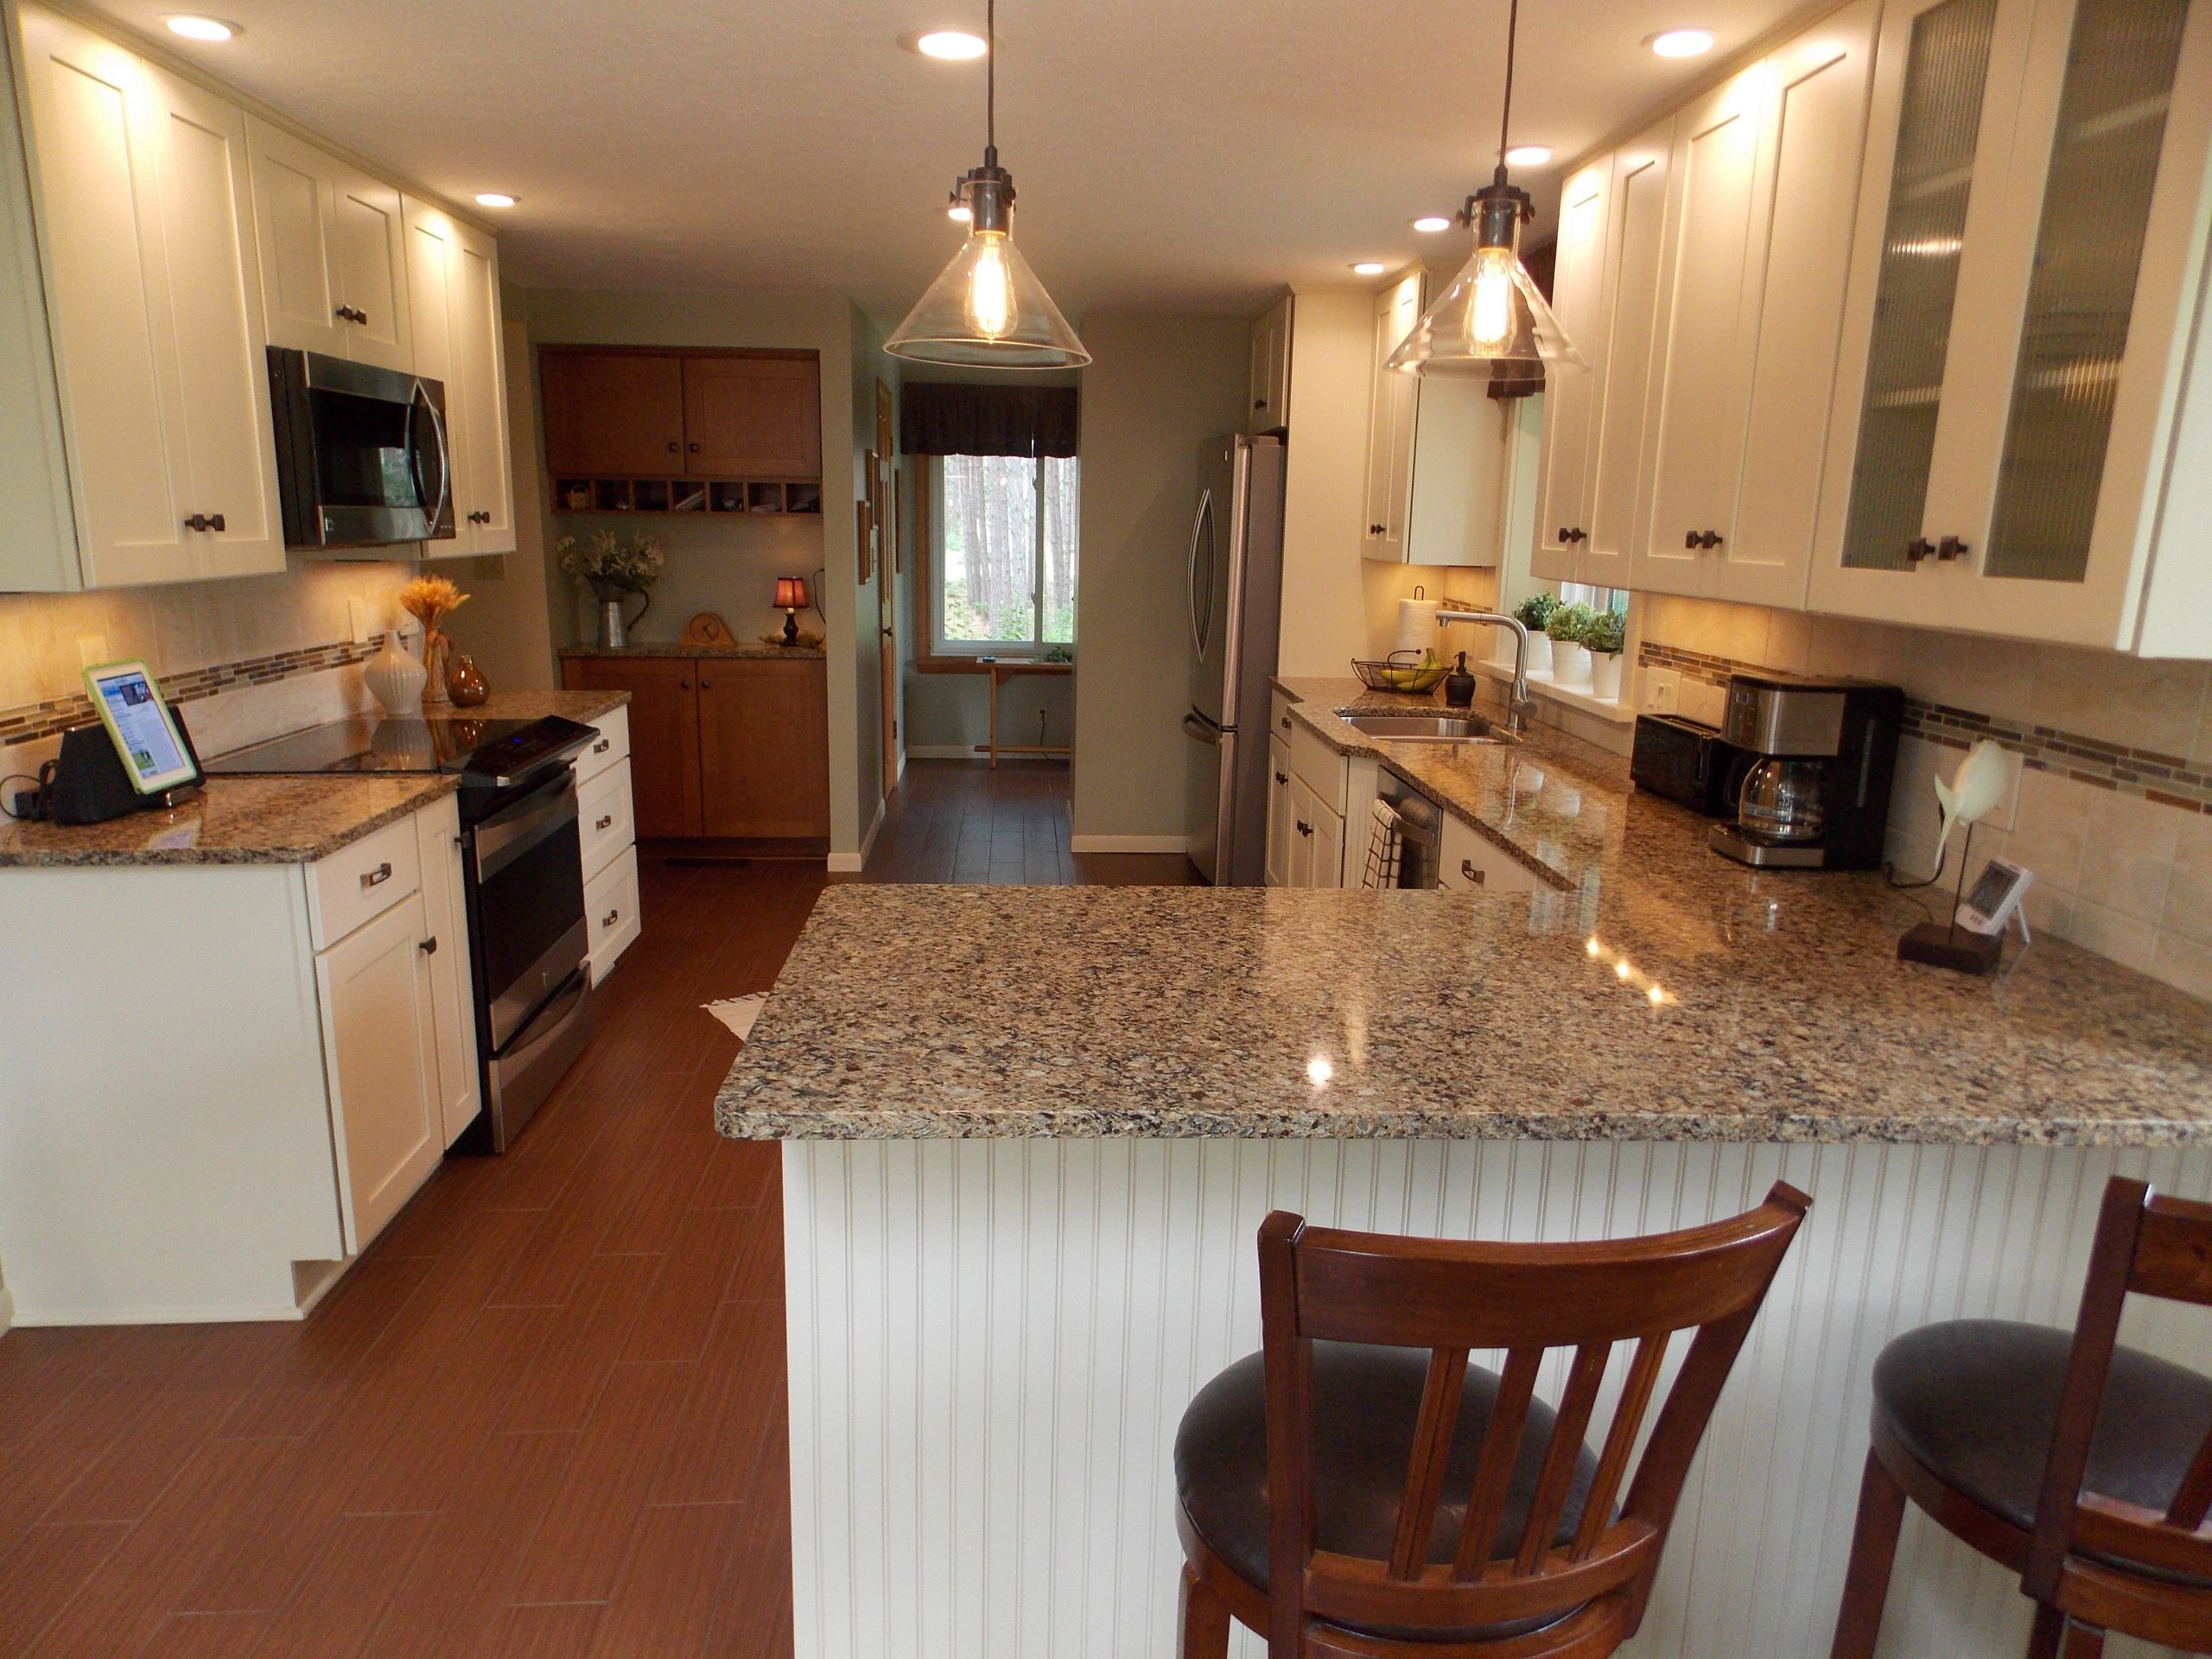 Kitchen Countertops Lowes
 Interior Pretty Laminate Countertops Lowes For Exciting